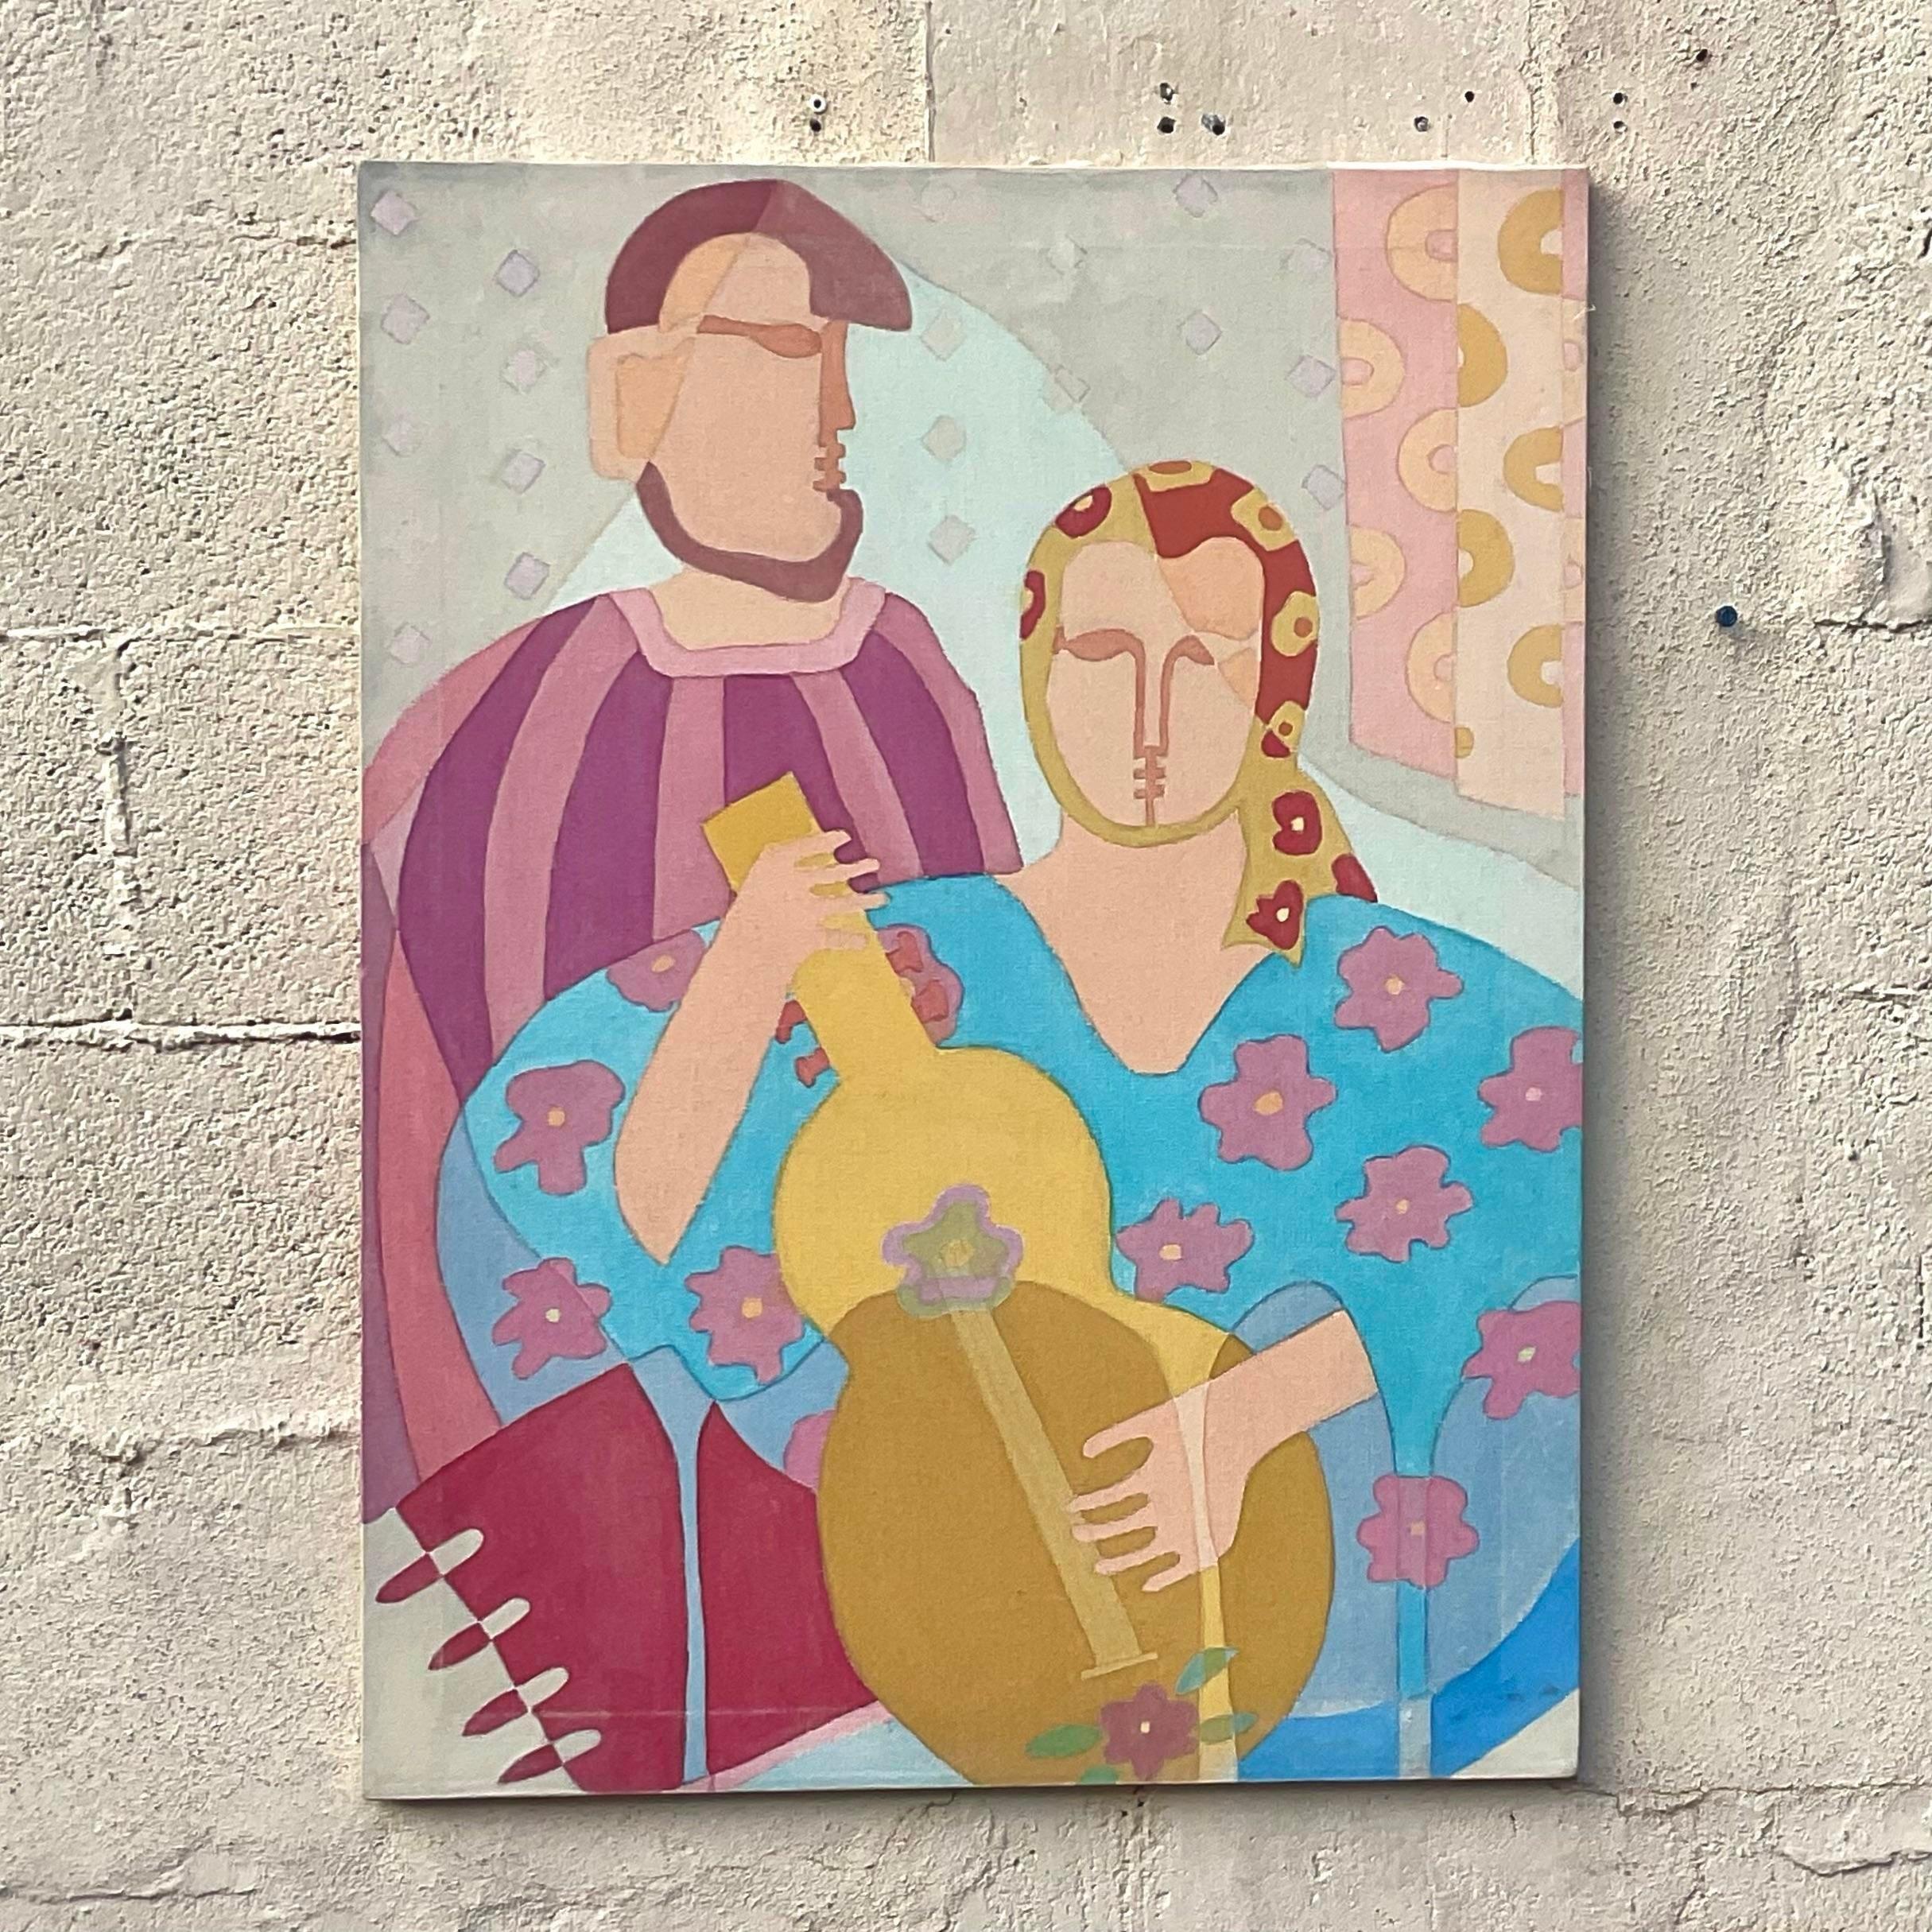 Vintage oil a canvas depicting a man and a women playing a stringed instrument. Painting uses abstract shapes to form a voice human figures with subtle pinks and light blues. Acquired from a Palm Beach Estate. 